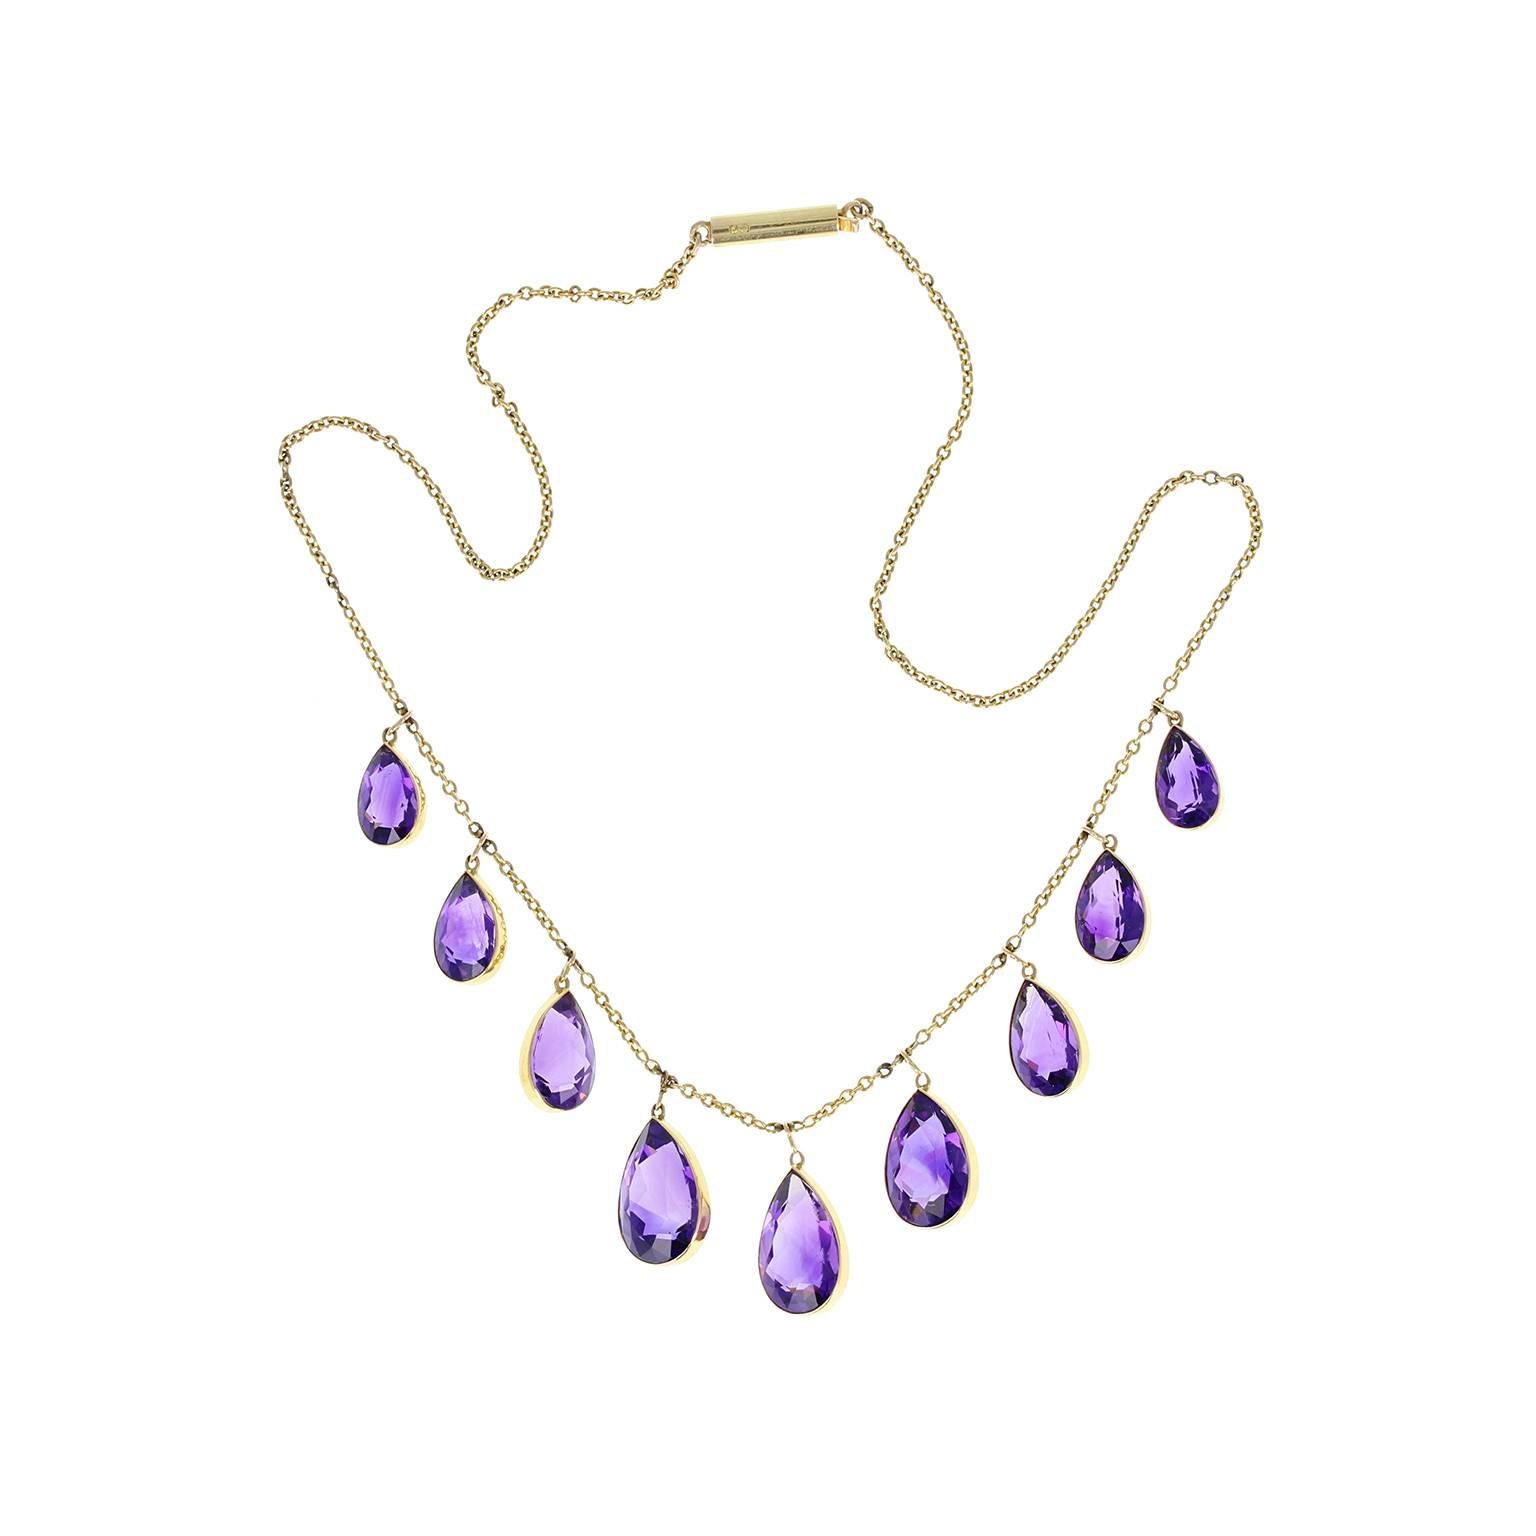 A favourite of the Victorians, this lovely necklace features some rather wonderful amethysts, nine in total, all perfectly matched in colour and slightly graduating in size. Suspended in fixed positions along a fine belcher-style 15ct gold chain.